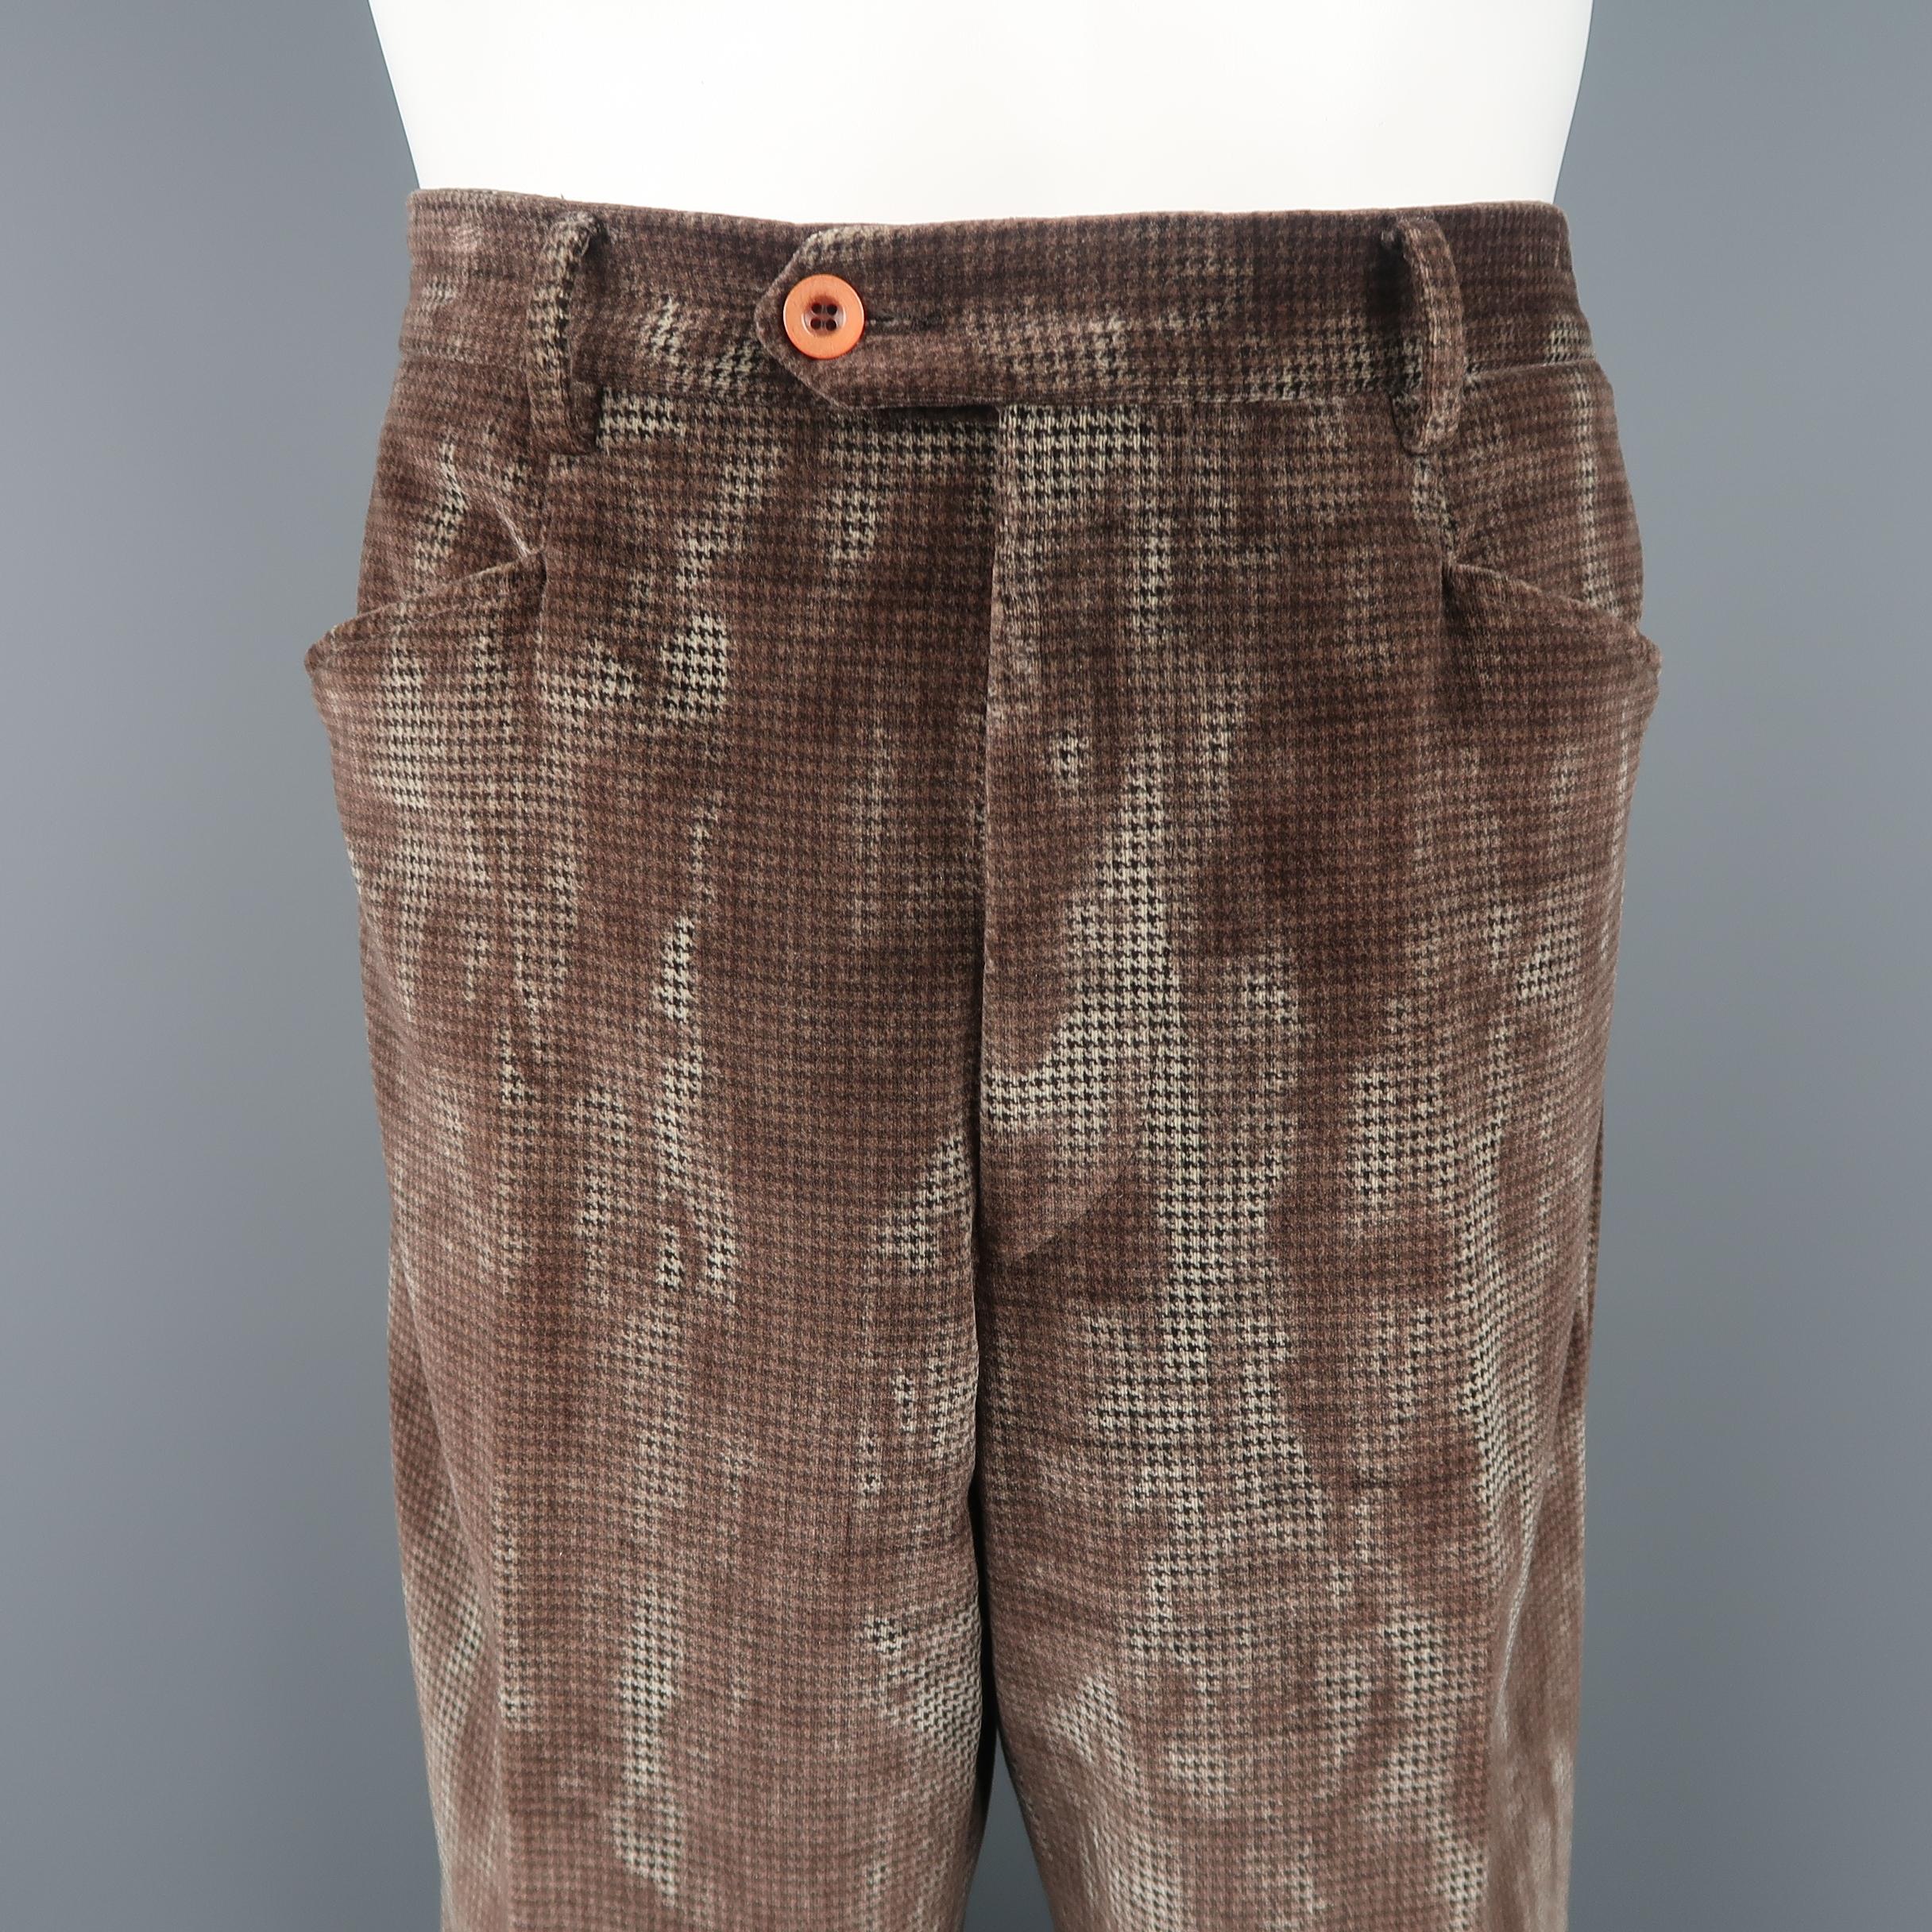 ETRO dress pants come in black and white houndstooth velvet with all taupe brown over bleach splatter marble effect print with a relaxed leg and tab closure. Made in Italy.
 
Good Pre-Owned Condition.
Marked: IT 48
 
Measurements:
 
Waist: 32